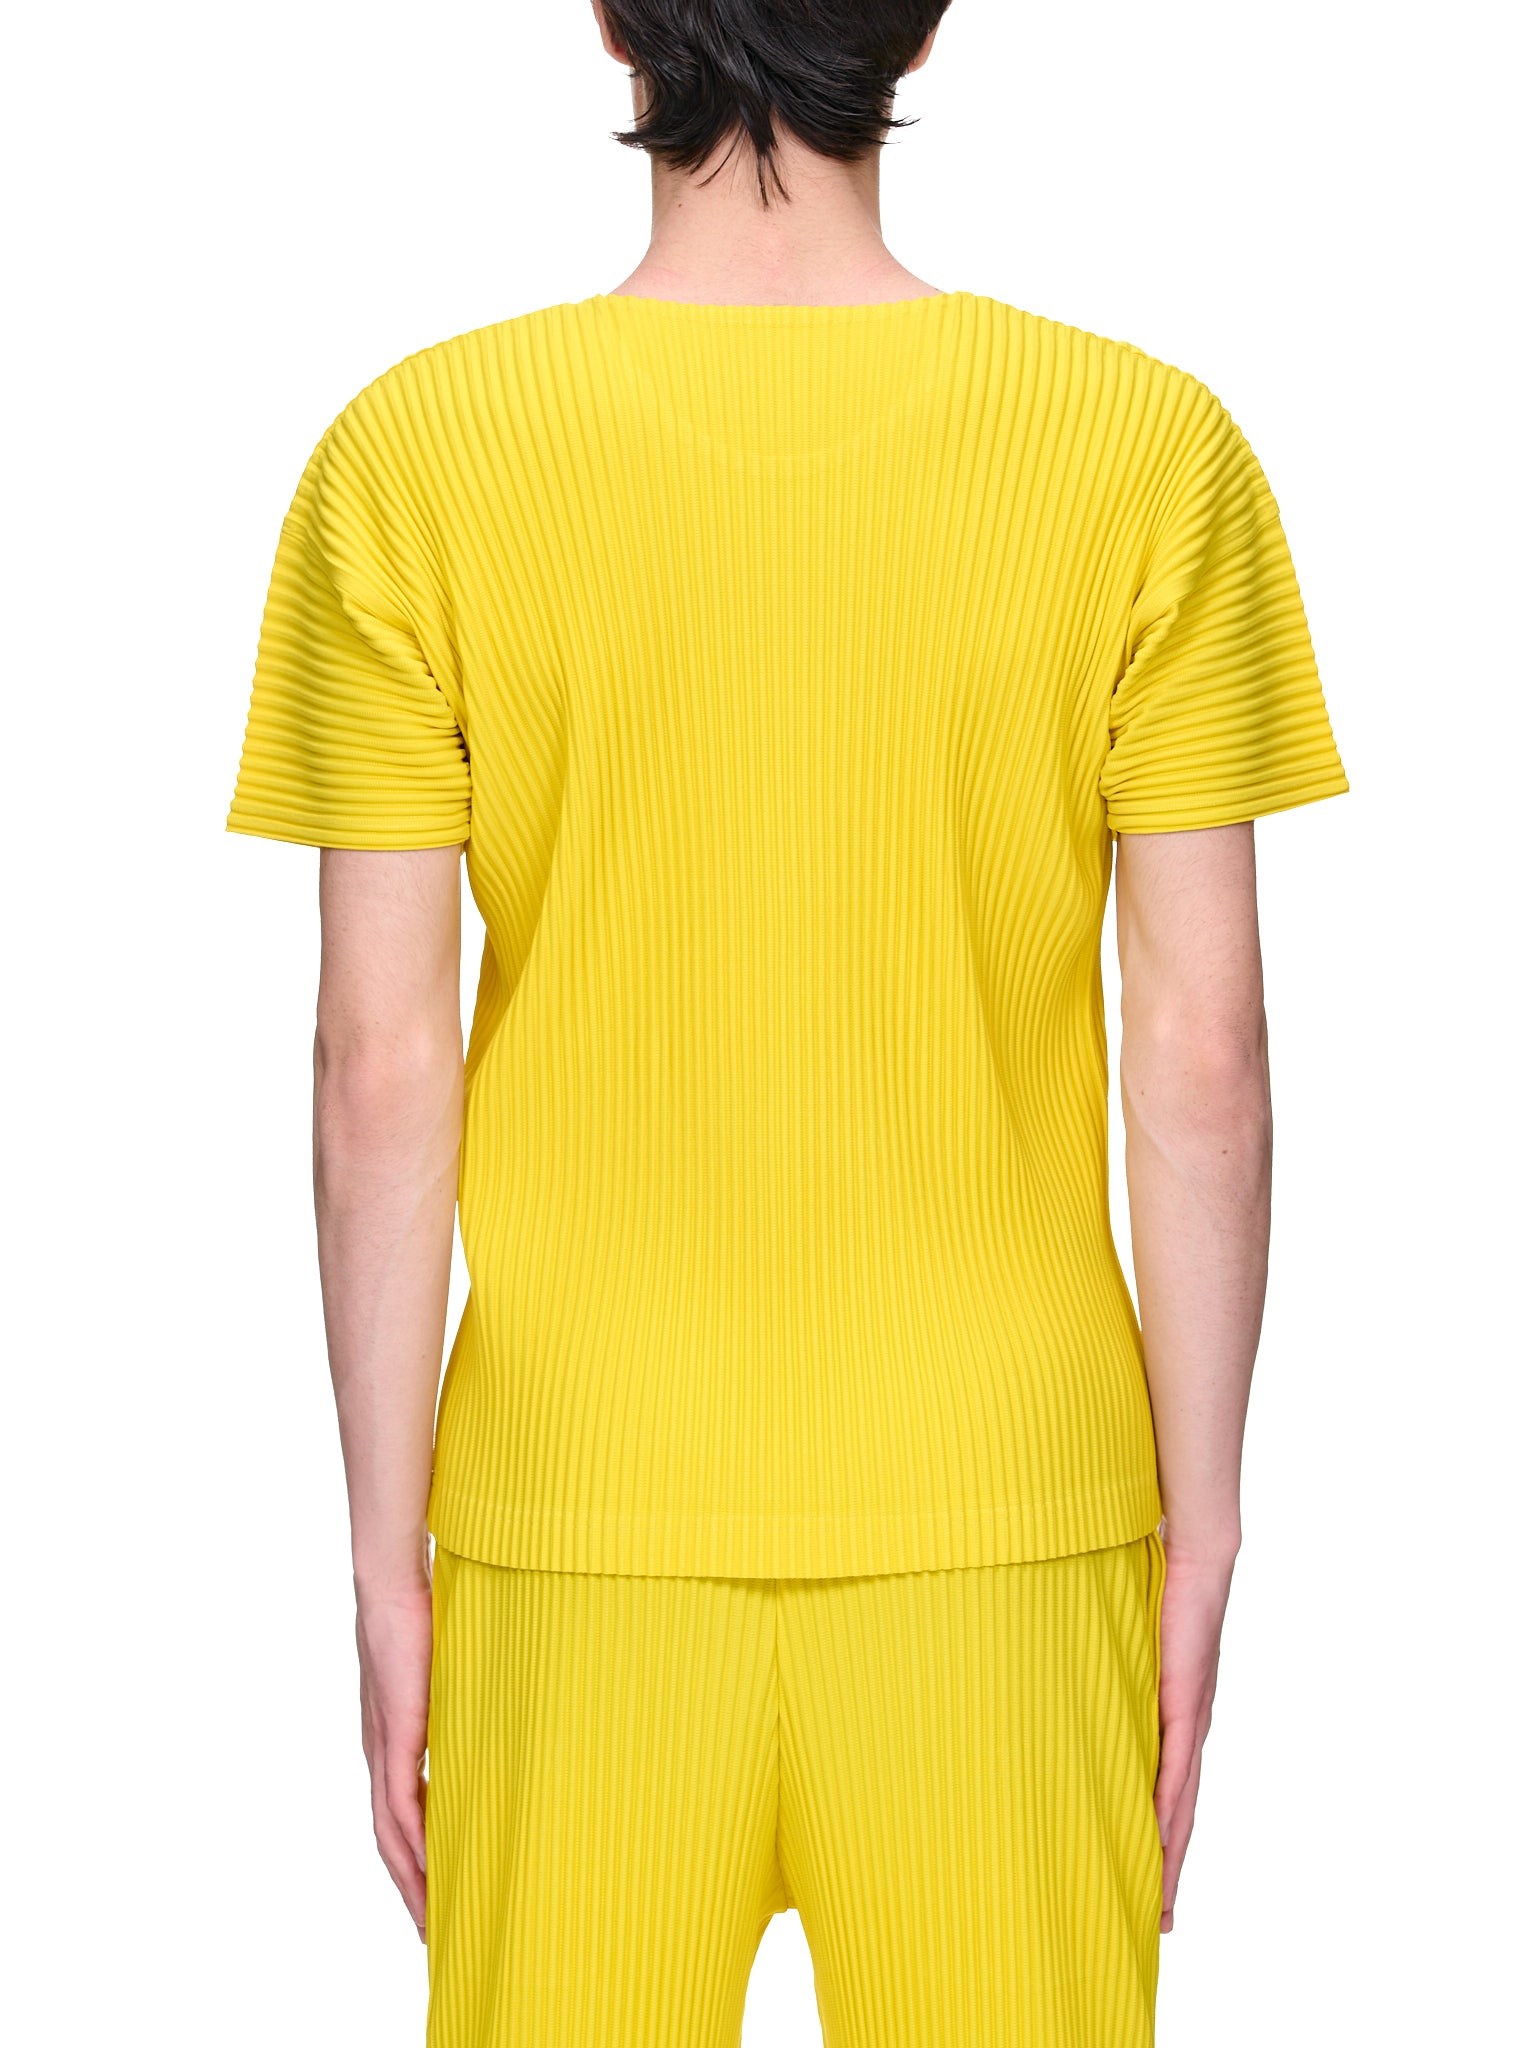 PLEATS PLEASE ISSEY MIYAKE T-Shirts - Women - 19 products